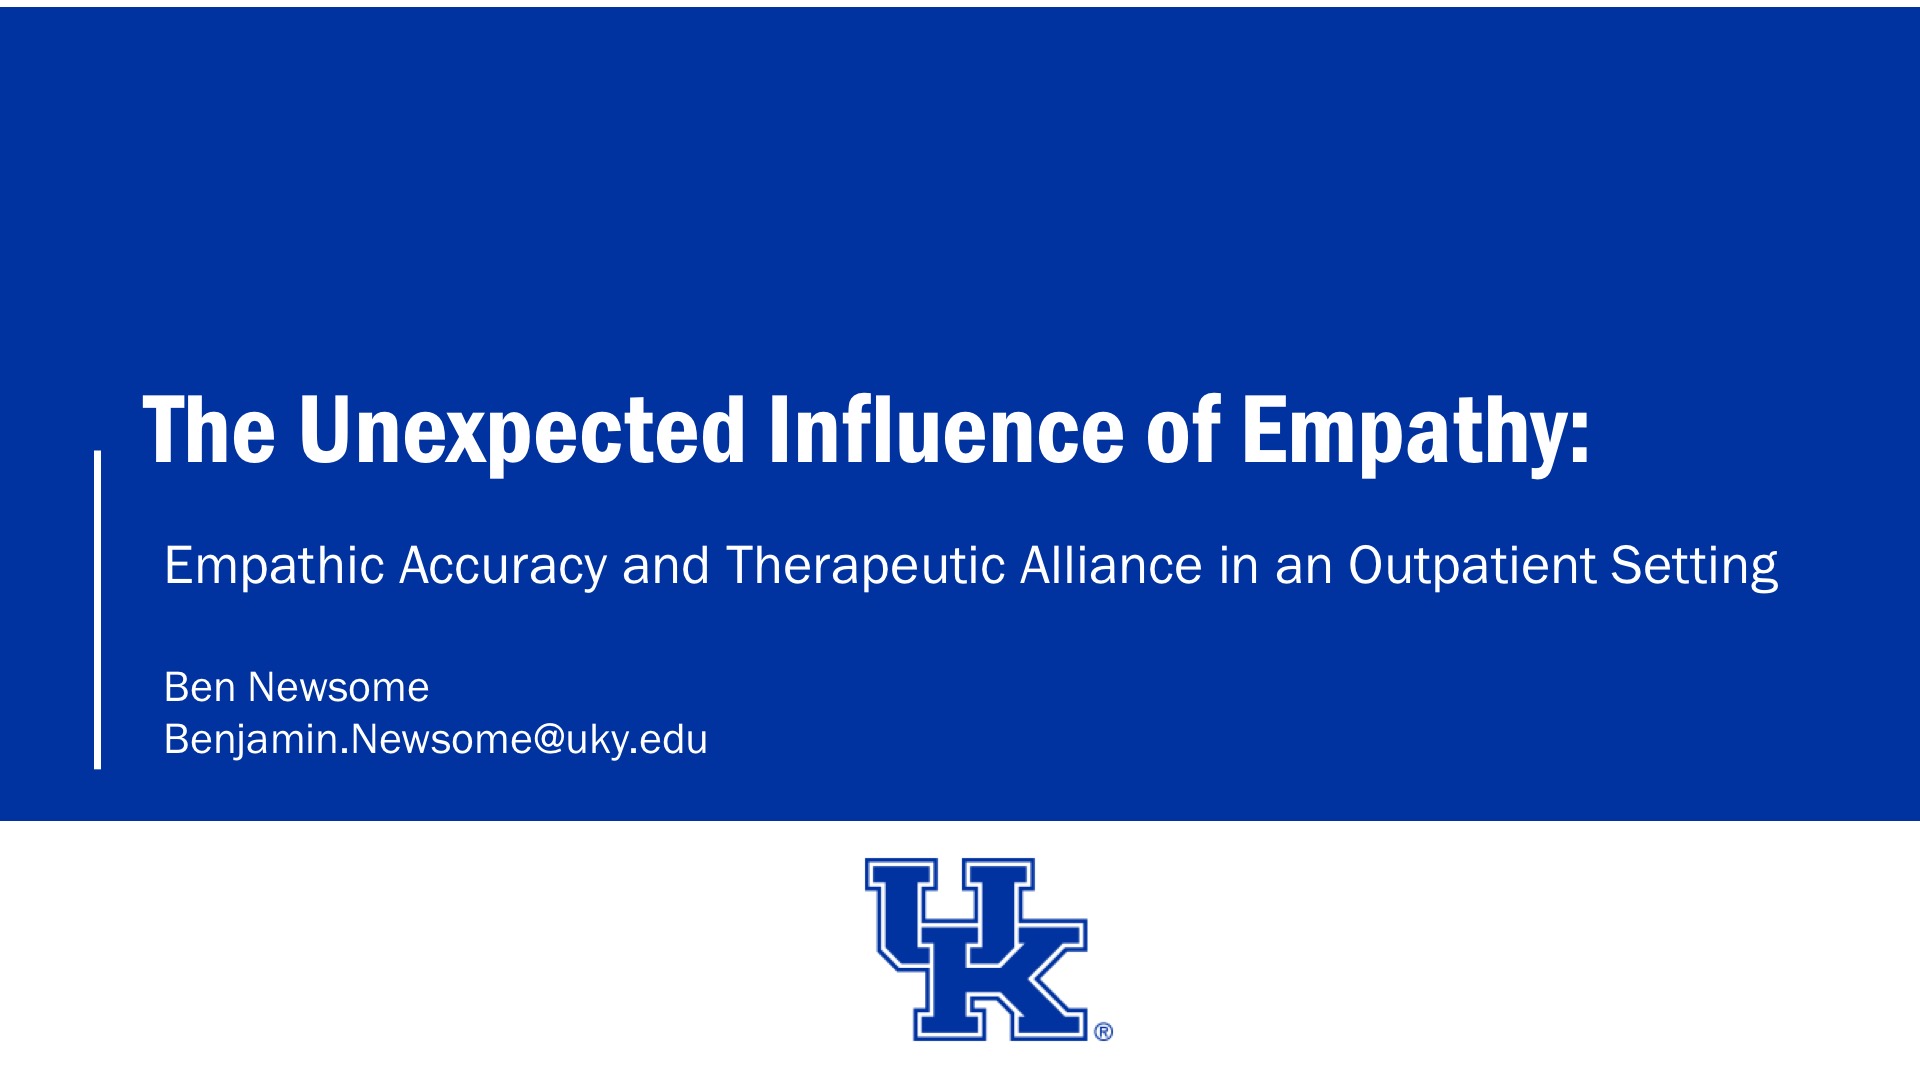 The Unexpected Influence of Empathy